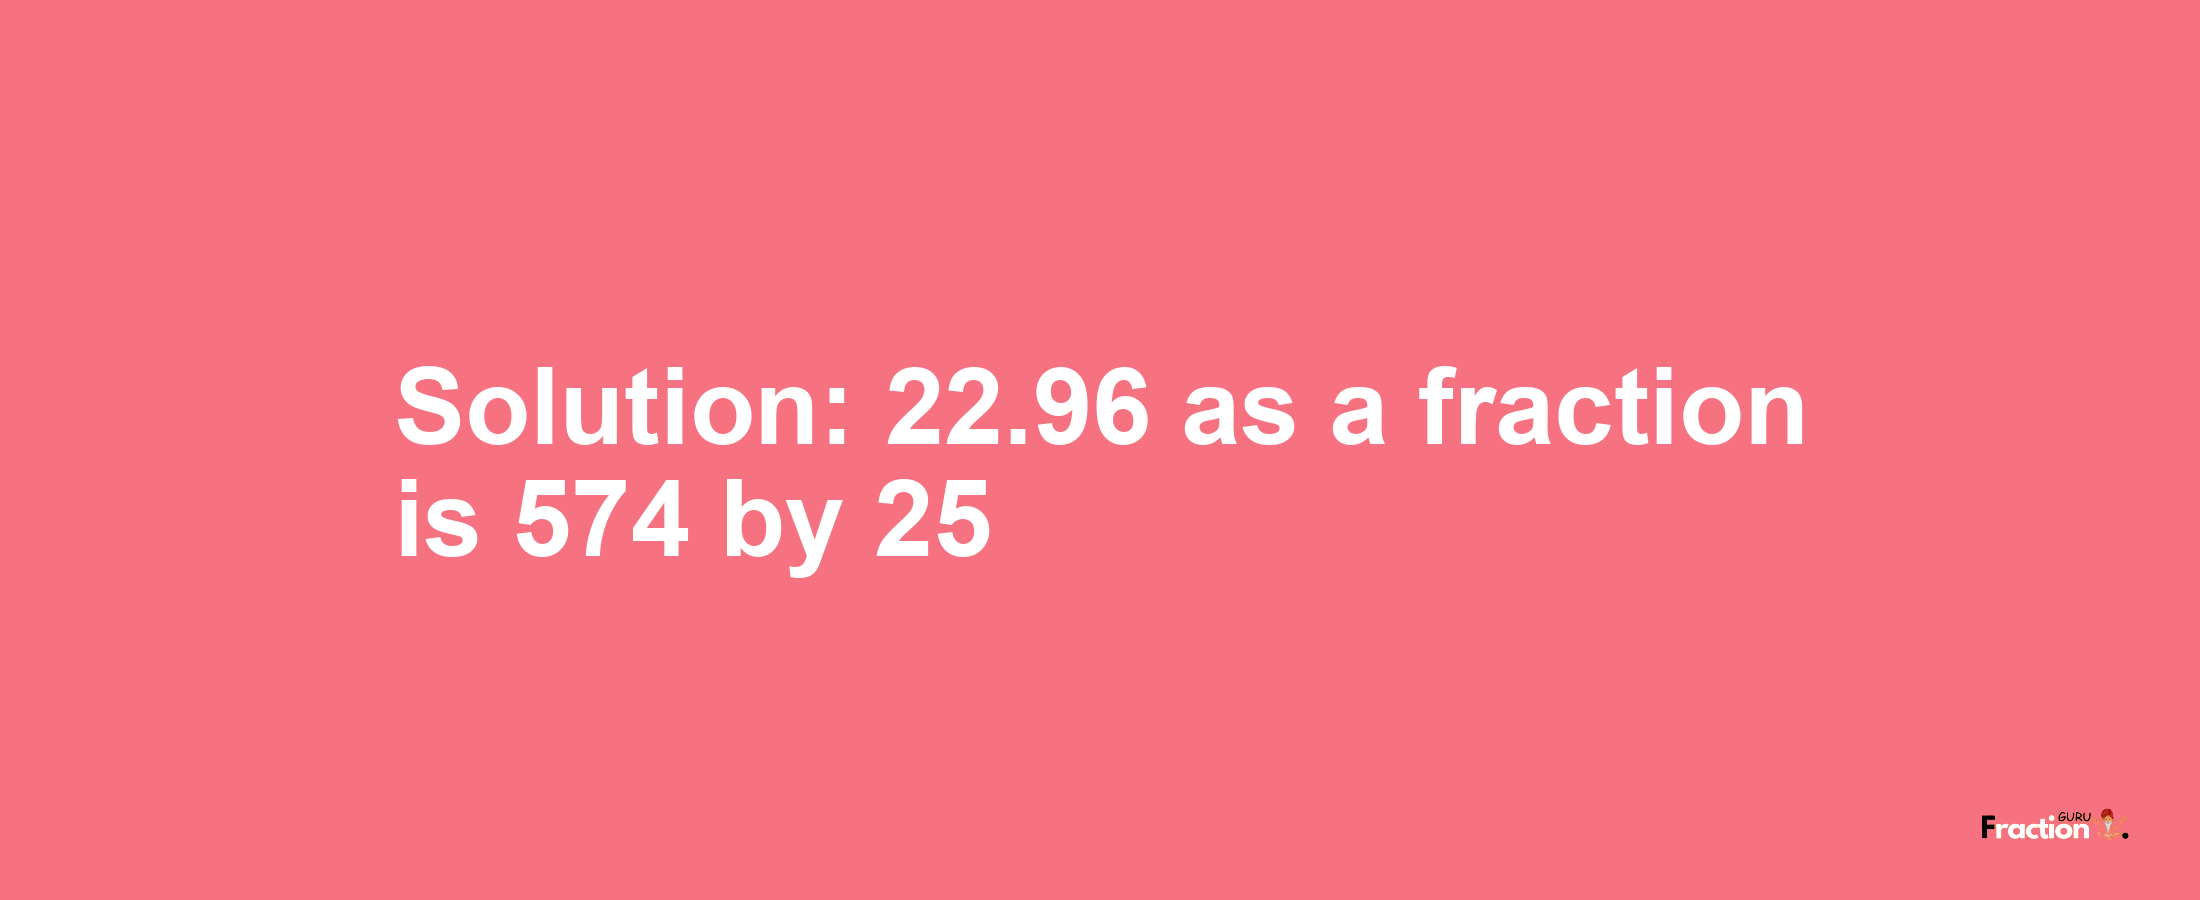 Solution:22.96 as a fraction is 574/25